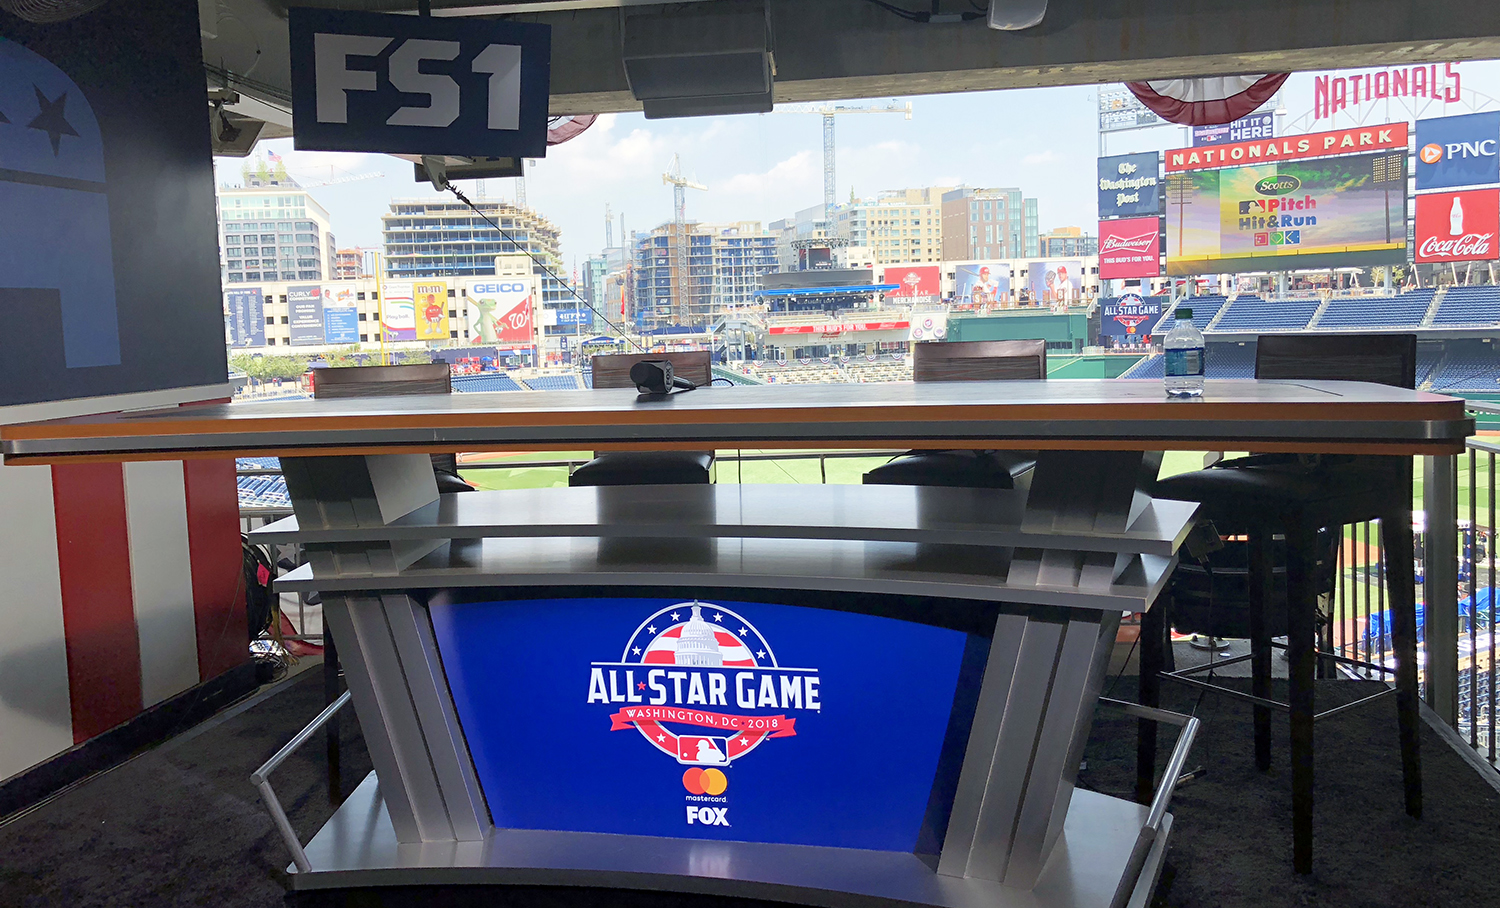 Live From MLB All-Star 2022: Fox Sports Rolls Out 70+ Cameras for 1080p HDR  Show at Biggest Midsummer Classic